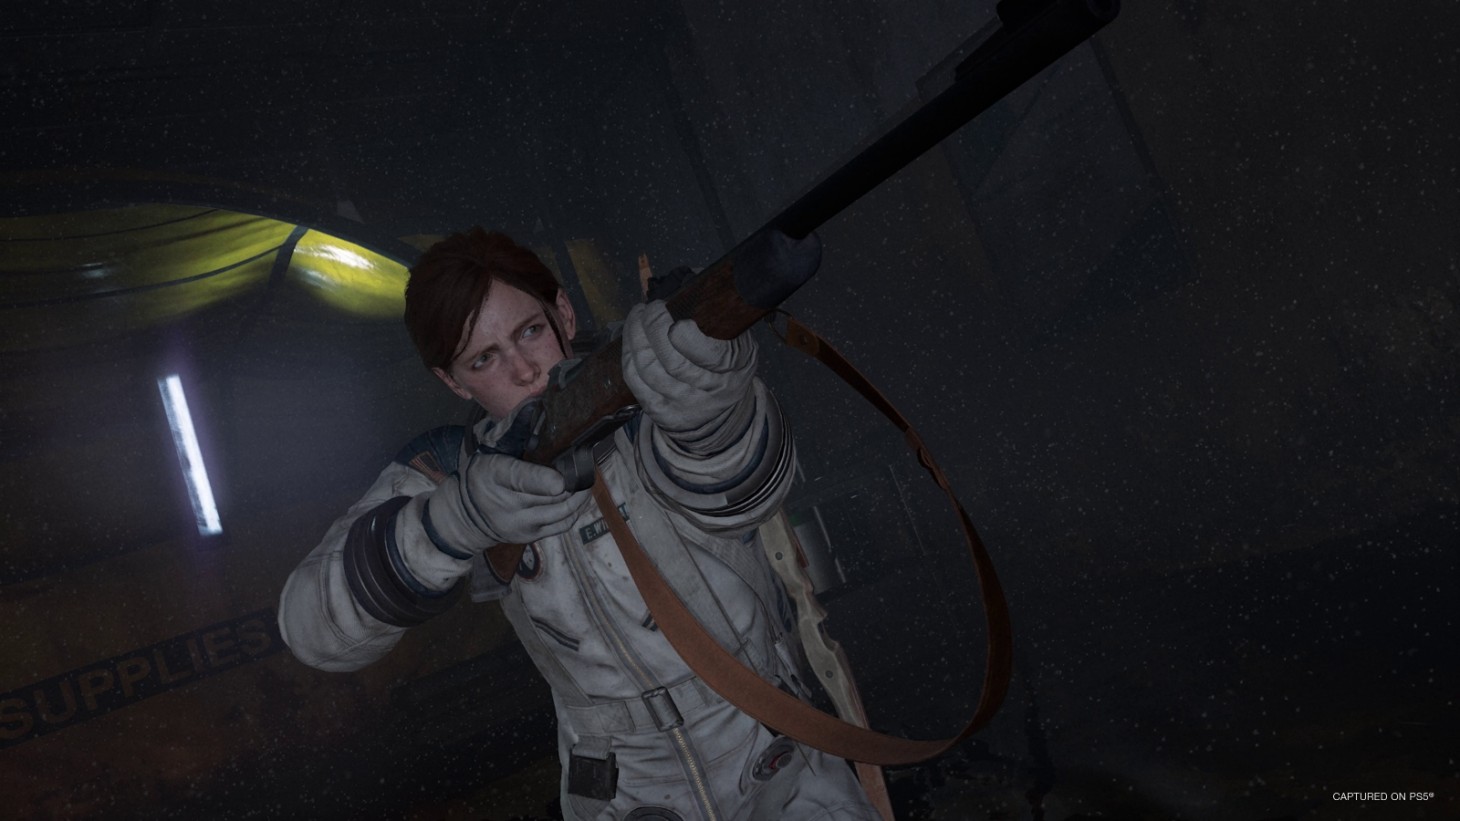 How Abby in 'The Last of Us: Part 2' challenged players to think differently